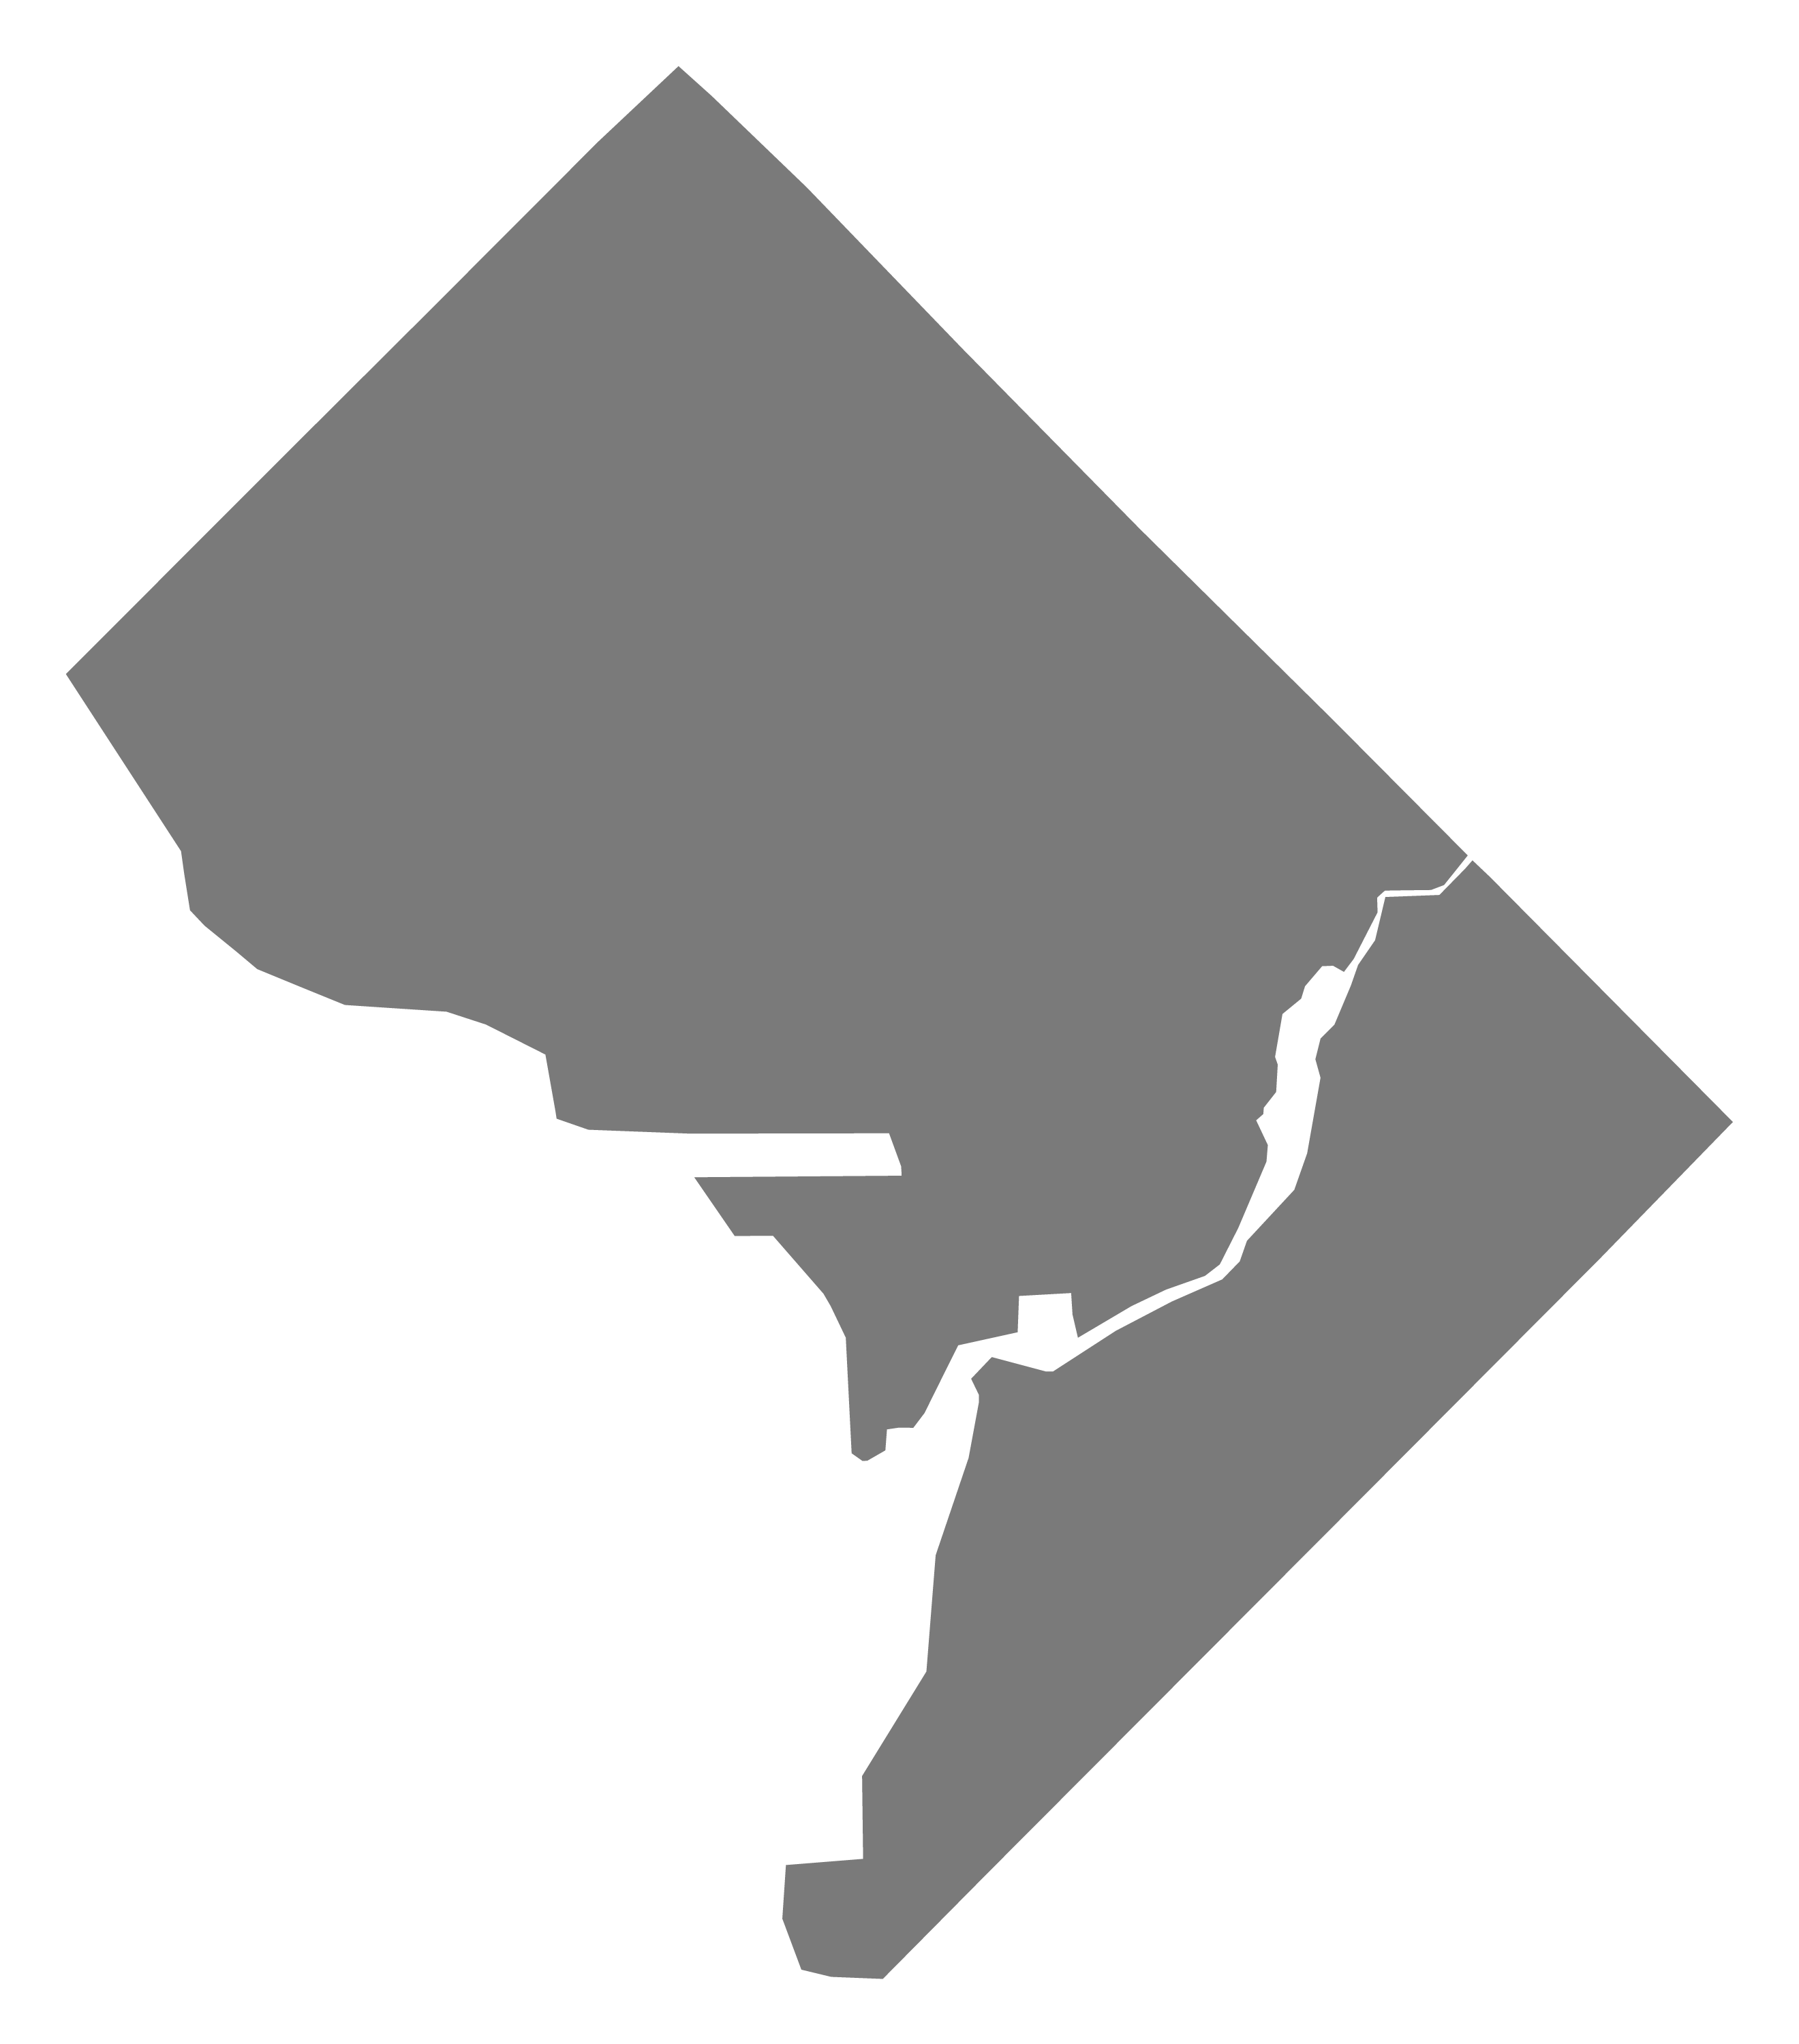 solid grey shape representing the area and borders of Washington, DC